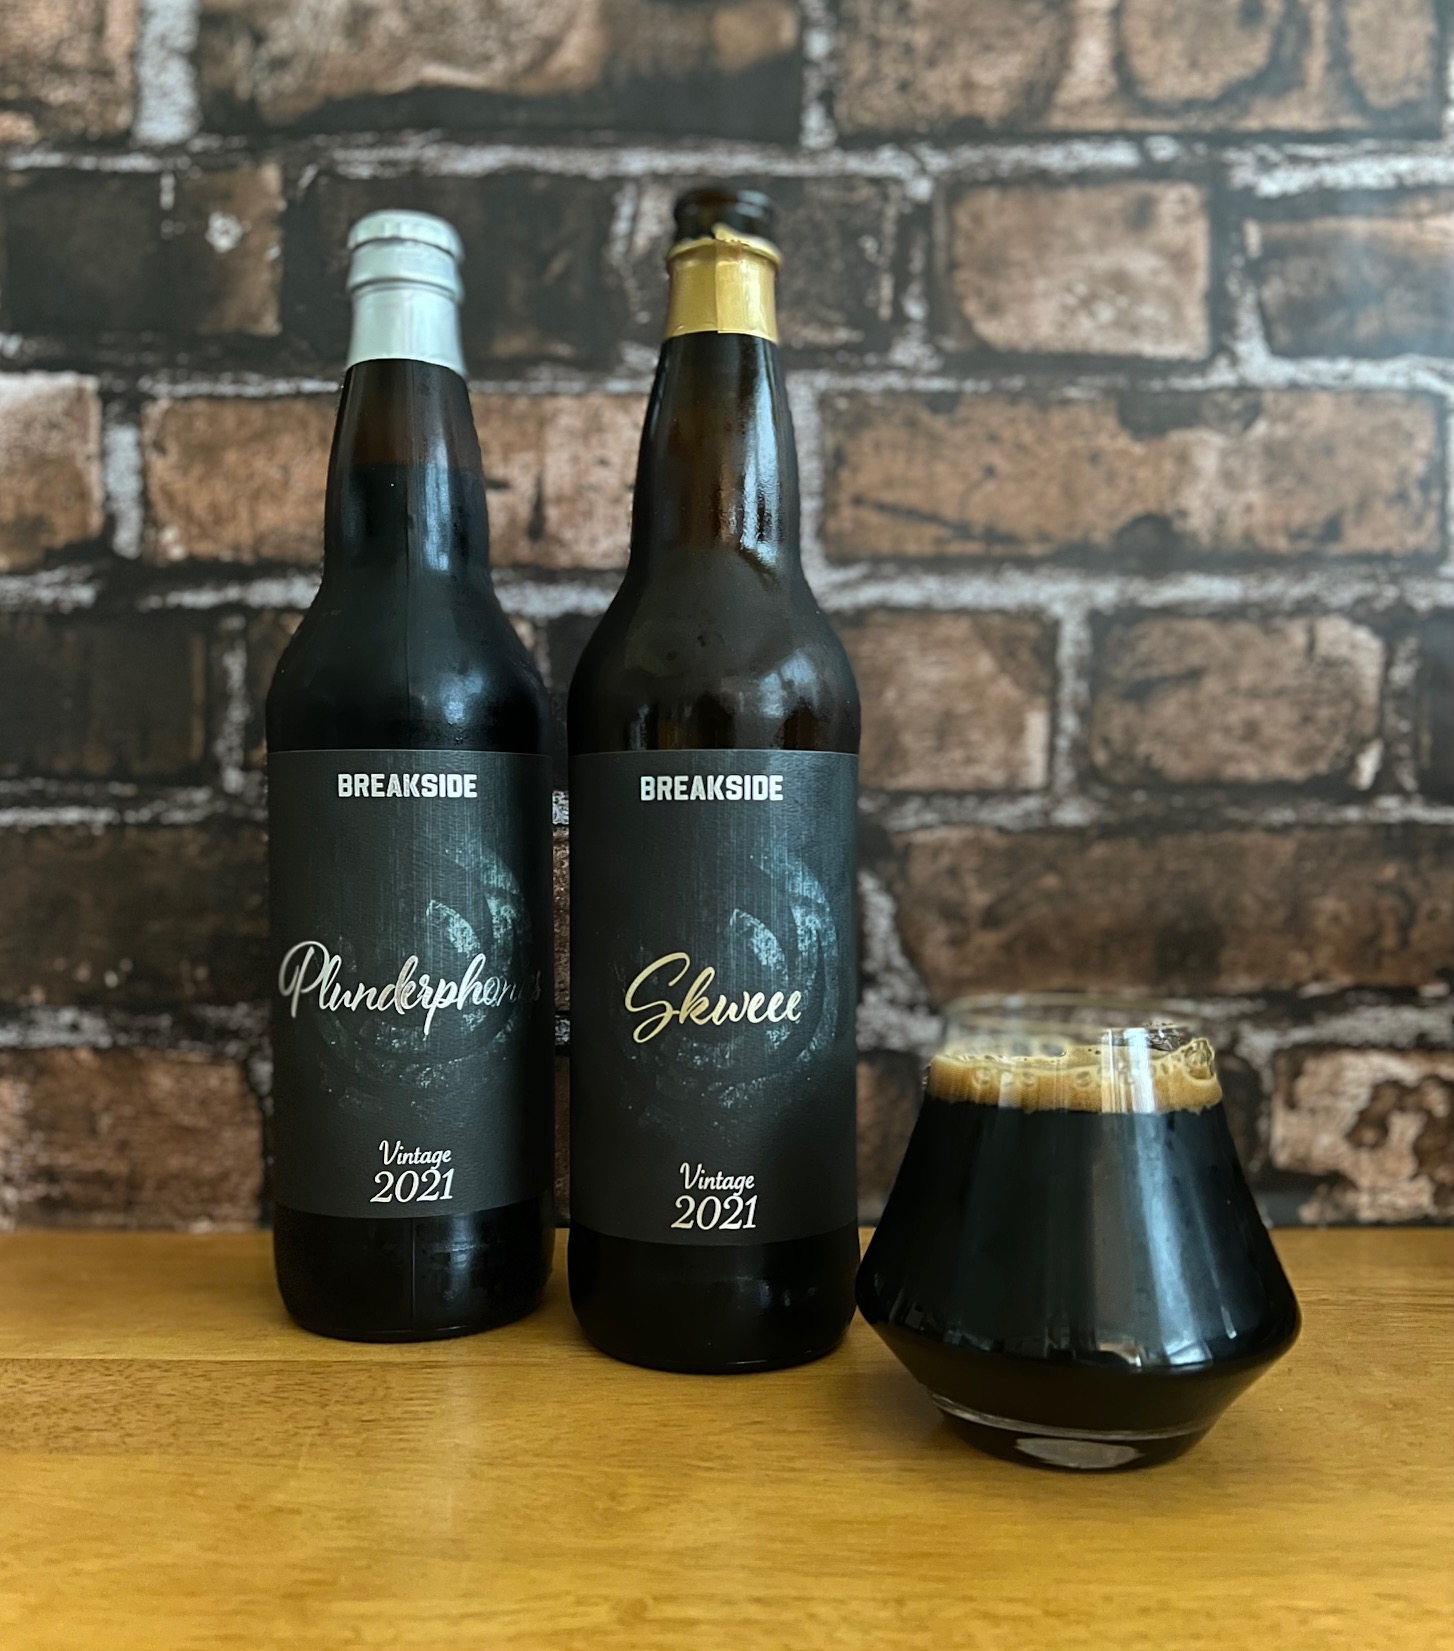 Breakside Brewery expands barrel-aged program with Plunderphonics and Skweee.